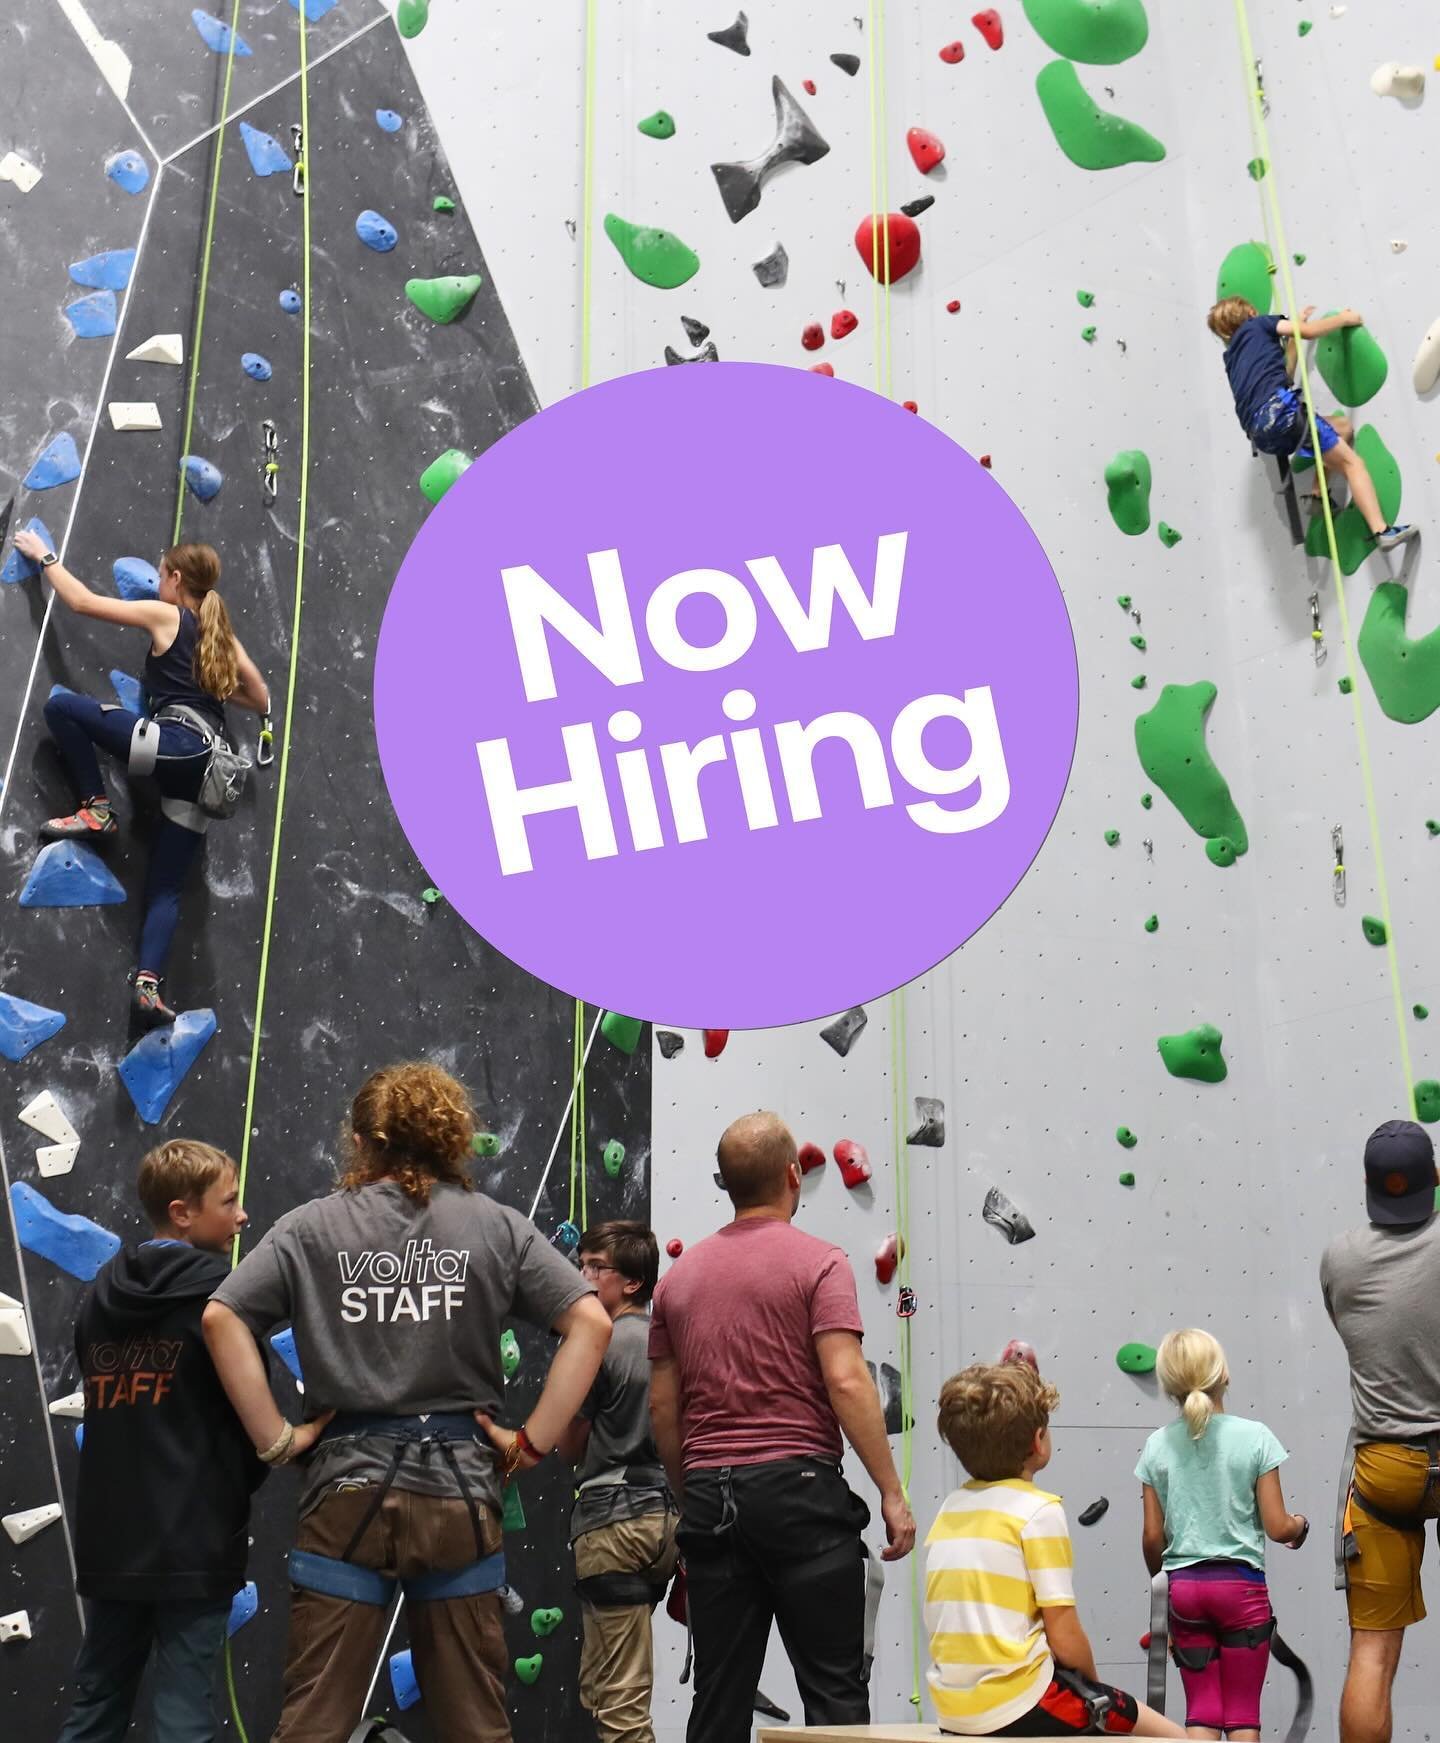 Want to join our team? Visit voltaclimbing.com to fill out an online application!

Part-time positions available:

 ● Shift Supervisors
 ● Front Desk staff

◾ Ideal for folks with late-afternoon + evening availability, 2+ days a week

Volta membershi